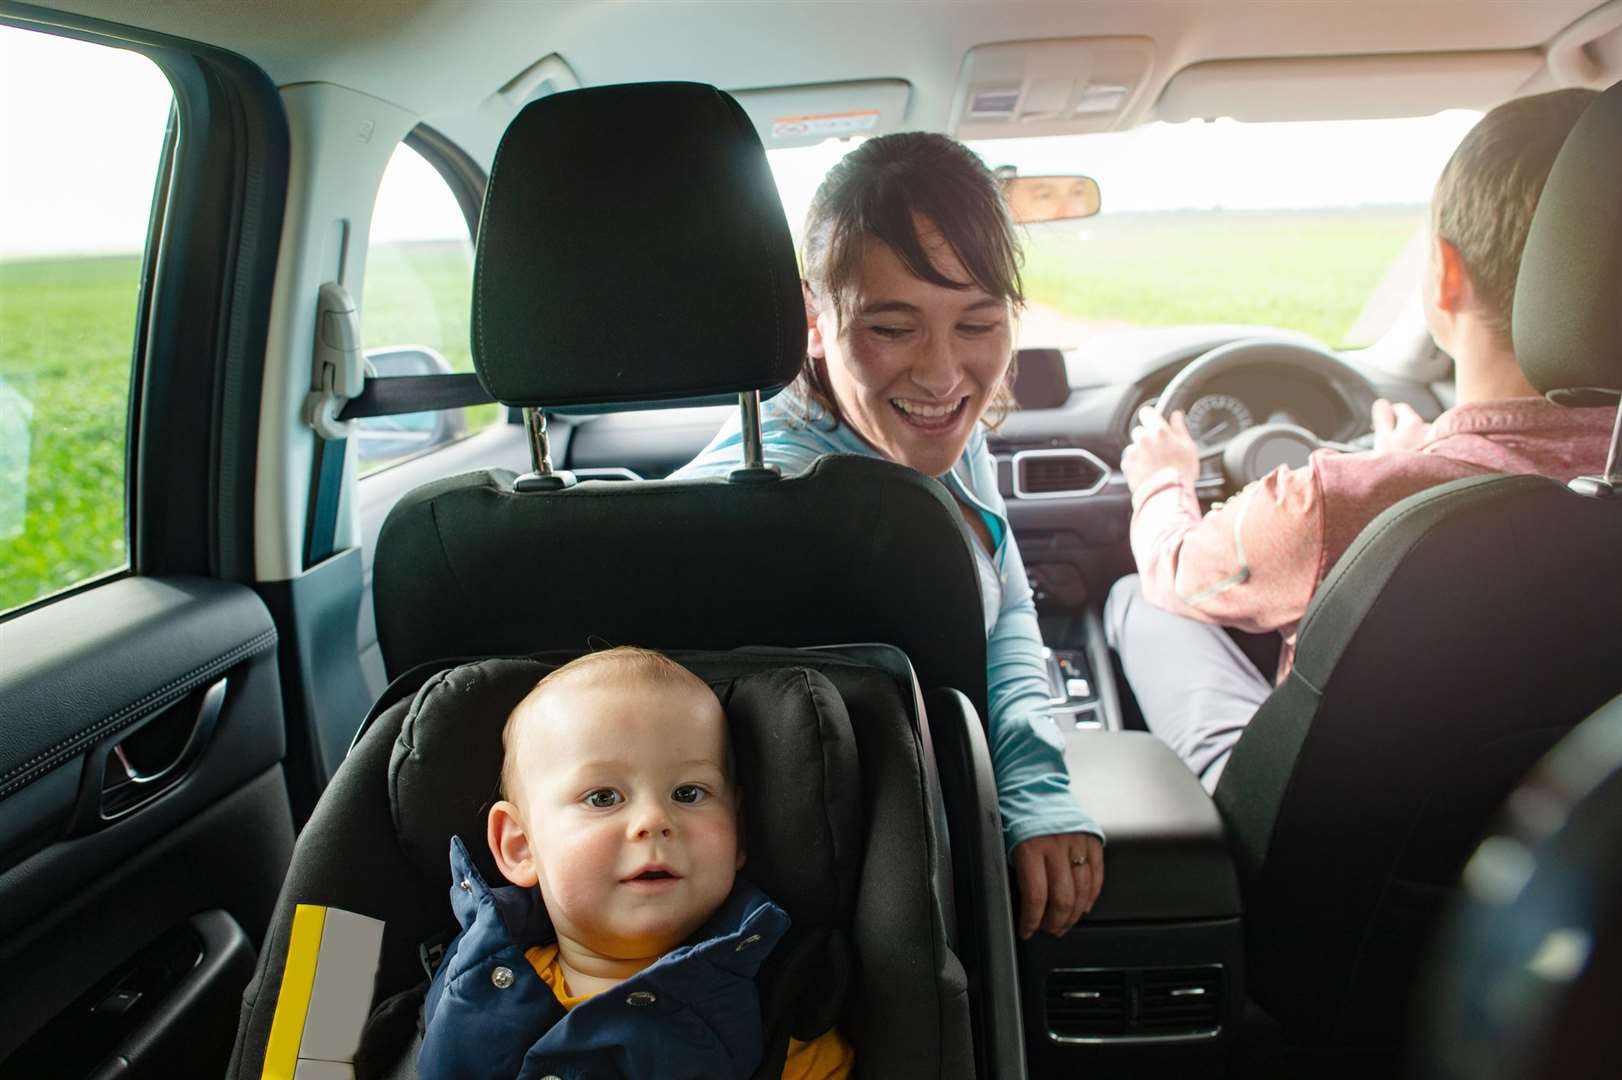 Small children should remain in rear facing car seats